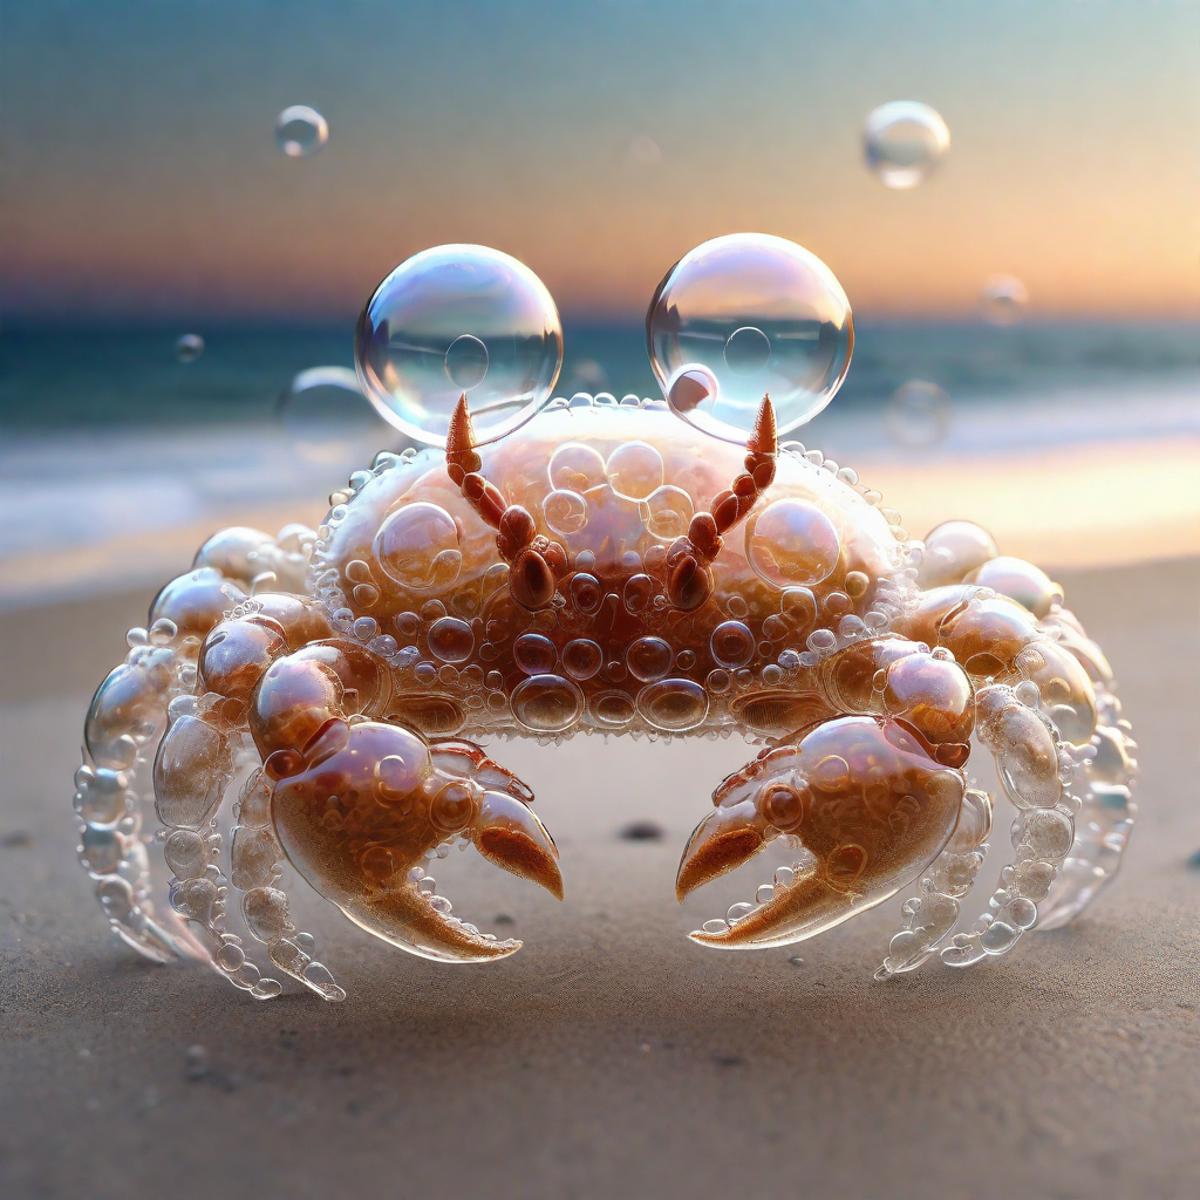 Bubble Crab on the Beach